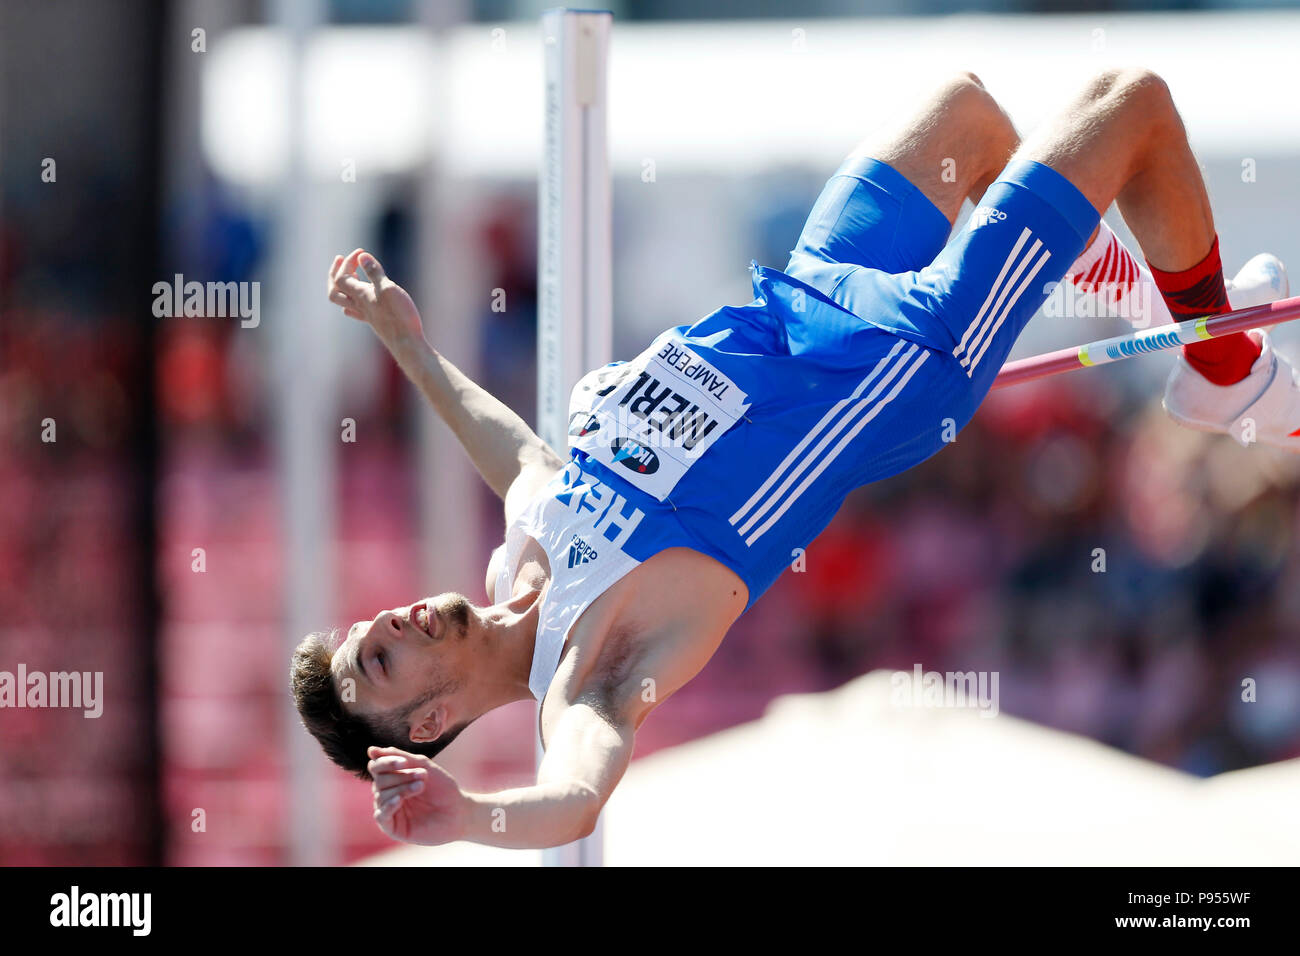 (180715) -- TAMPERE, July 15, 2018 (Xinhua) -- Antonios Merlos of Greece competes during the Men's High Jump Final at the IAAF World U20 Championships in Tampere, Finland, on July 14, 2018. Antonios Merlos won the gold medal with 2.23 meters. Stock Photo